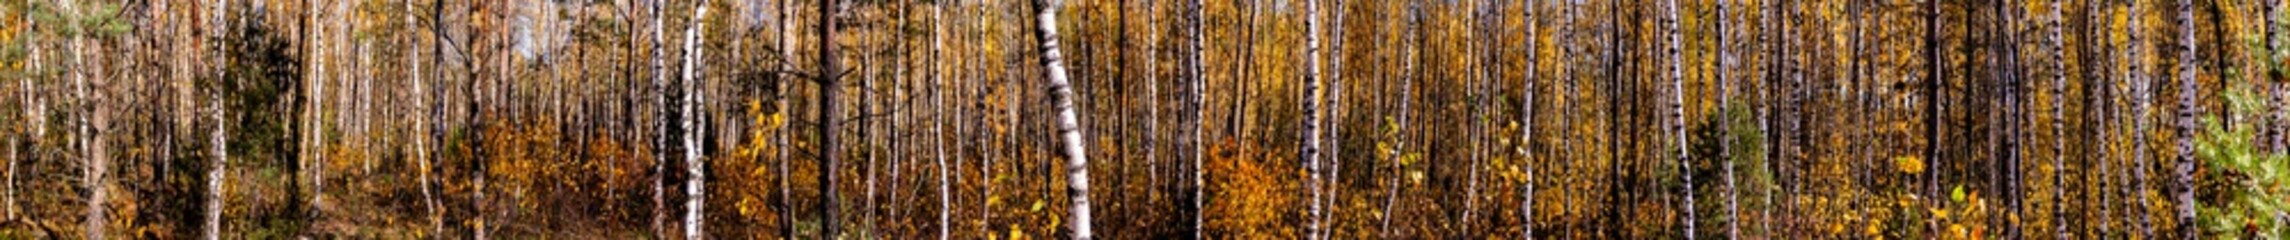 Very long Beautiful panorama of the autumn birch forest. Sunny day in a birch forest, long shadows...